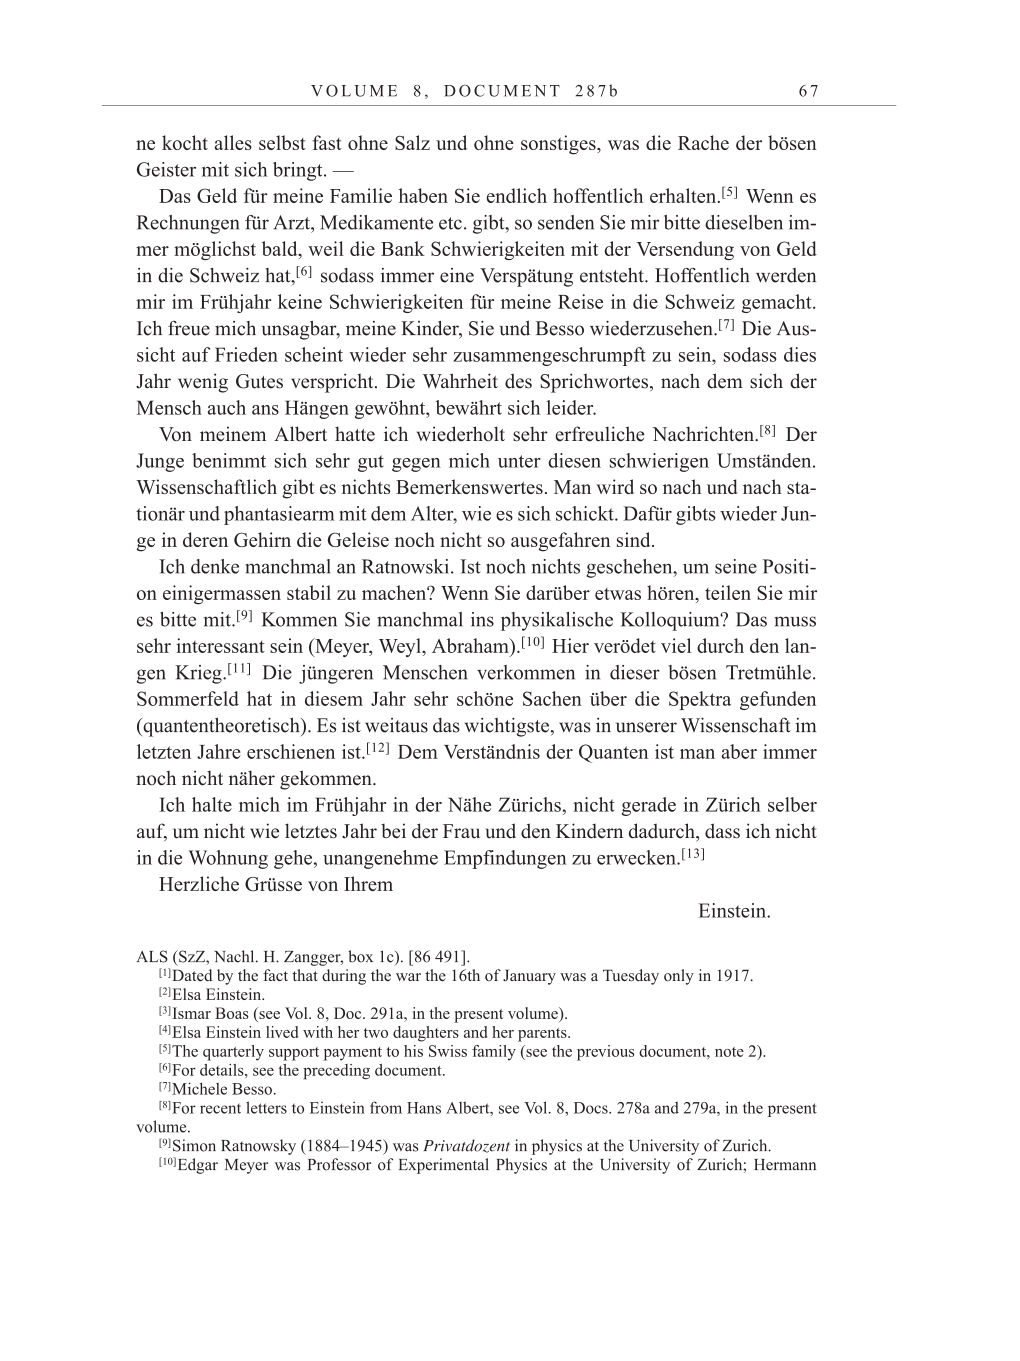 Volume 10: The Berlin Years: Correspondence May-December 1920 / Supplementary Correspondence 1909-1920 page 67